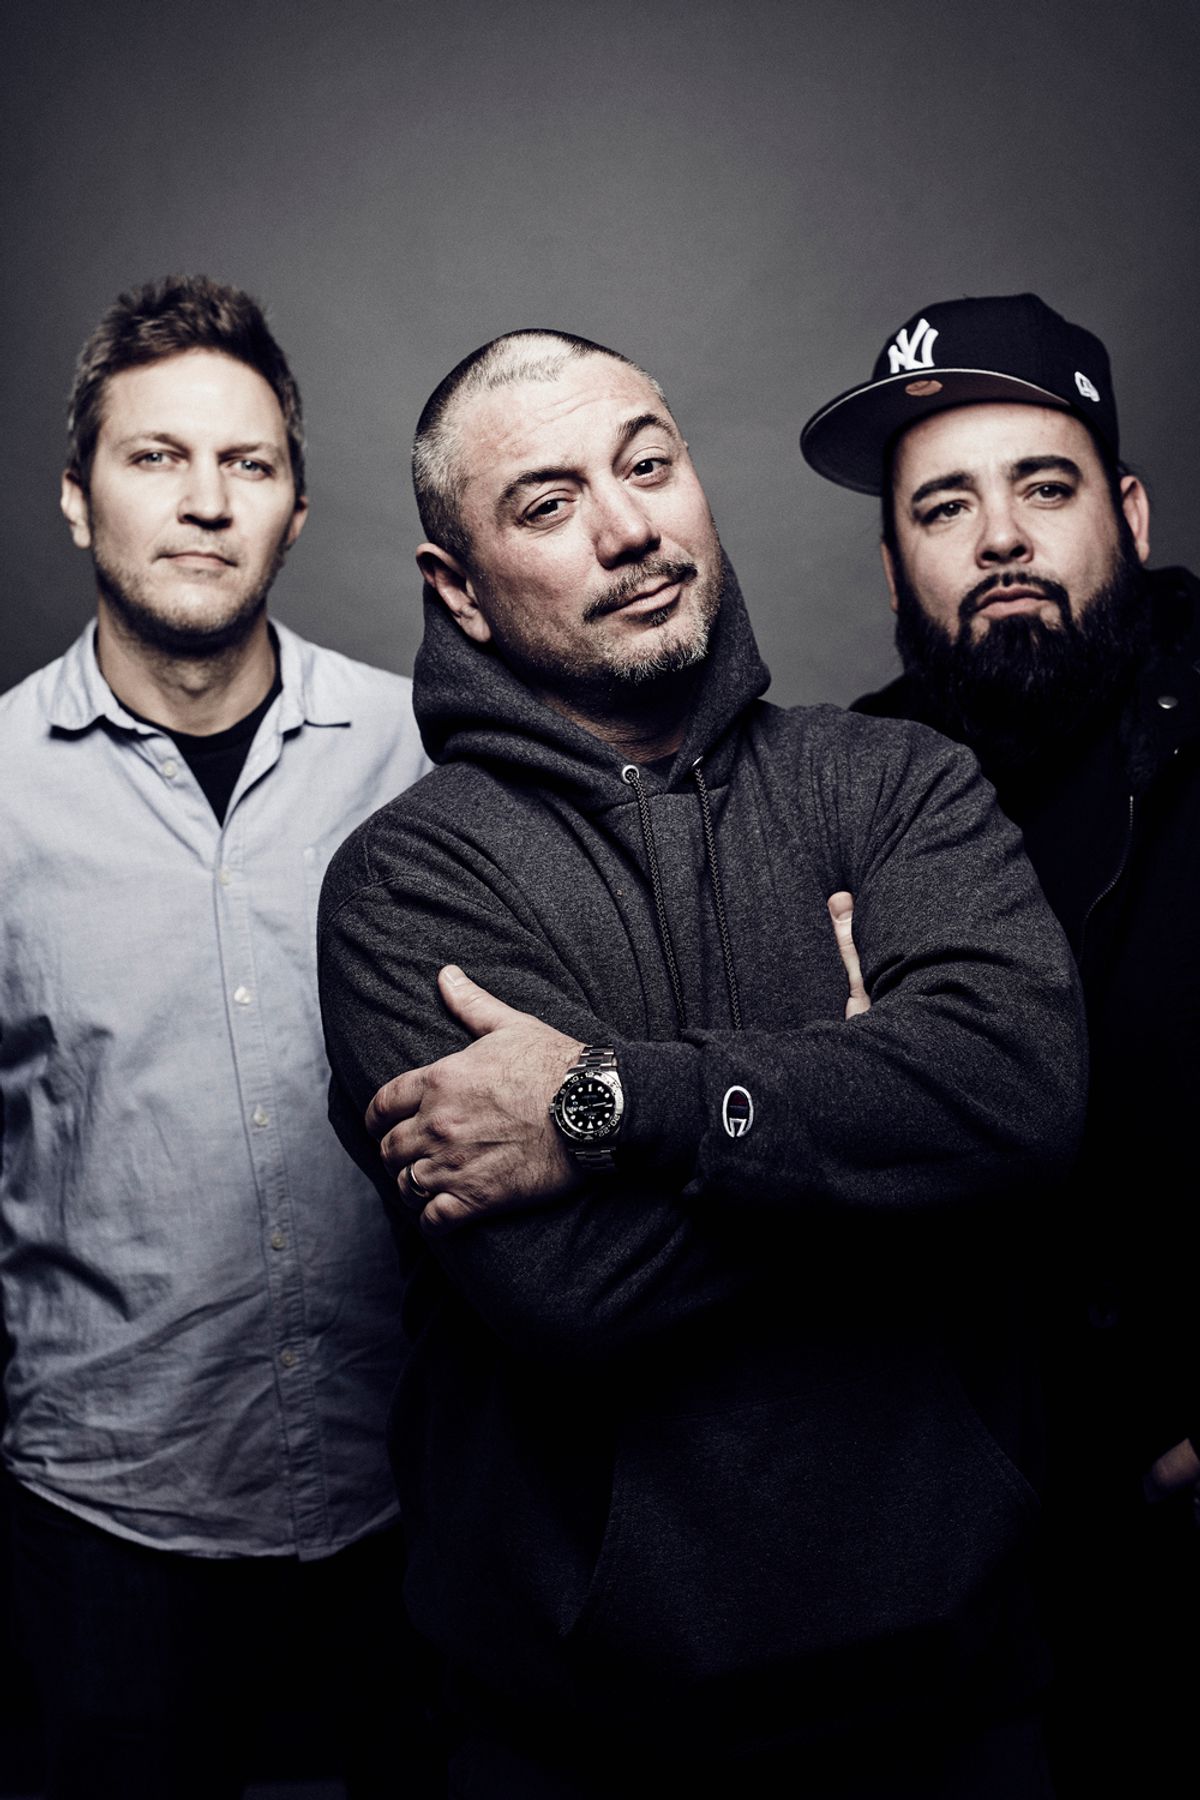 Fun Lovin' Criminals play 'Come Find Yourself' - Back To The Nineties